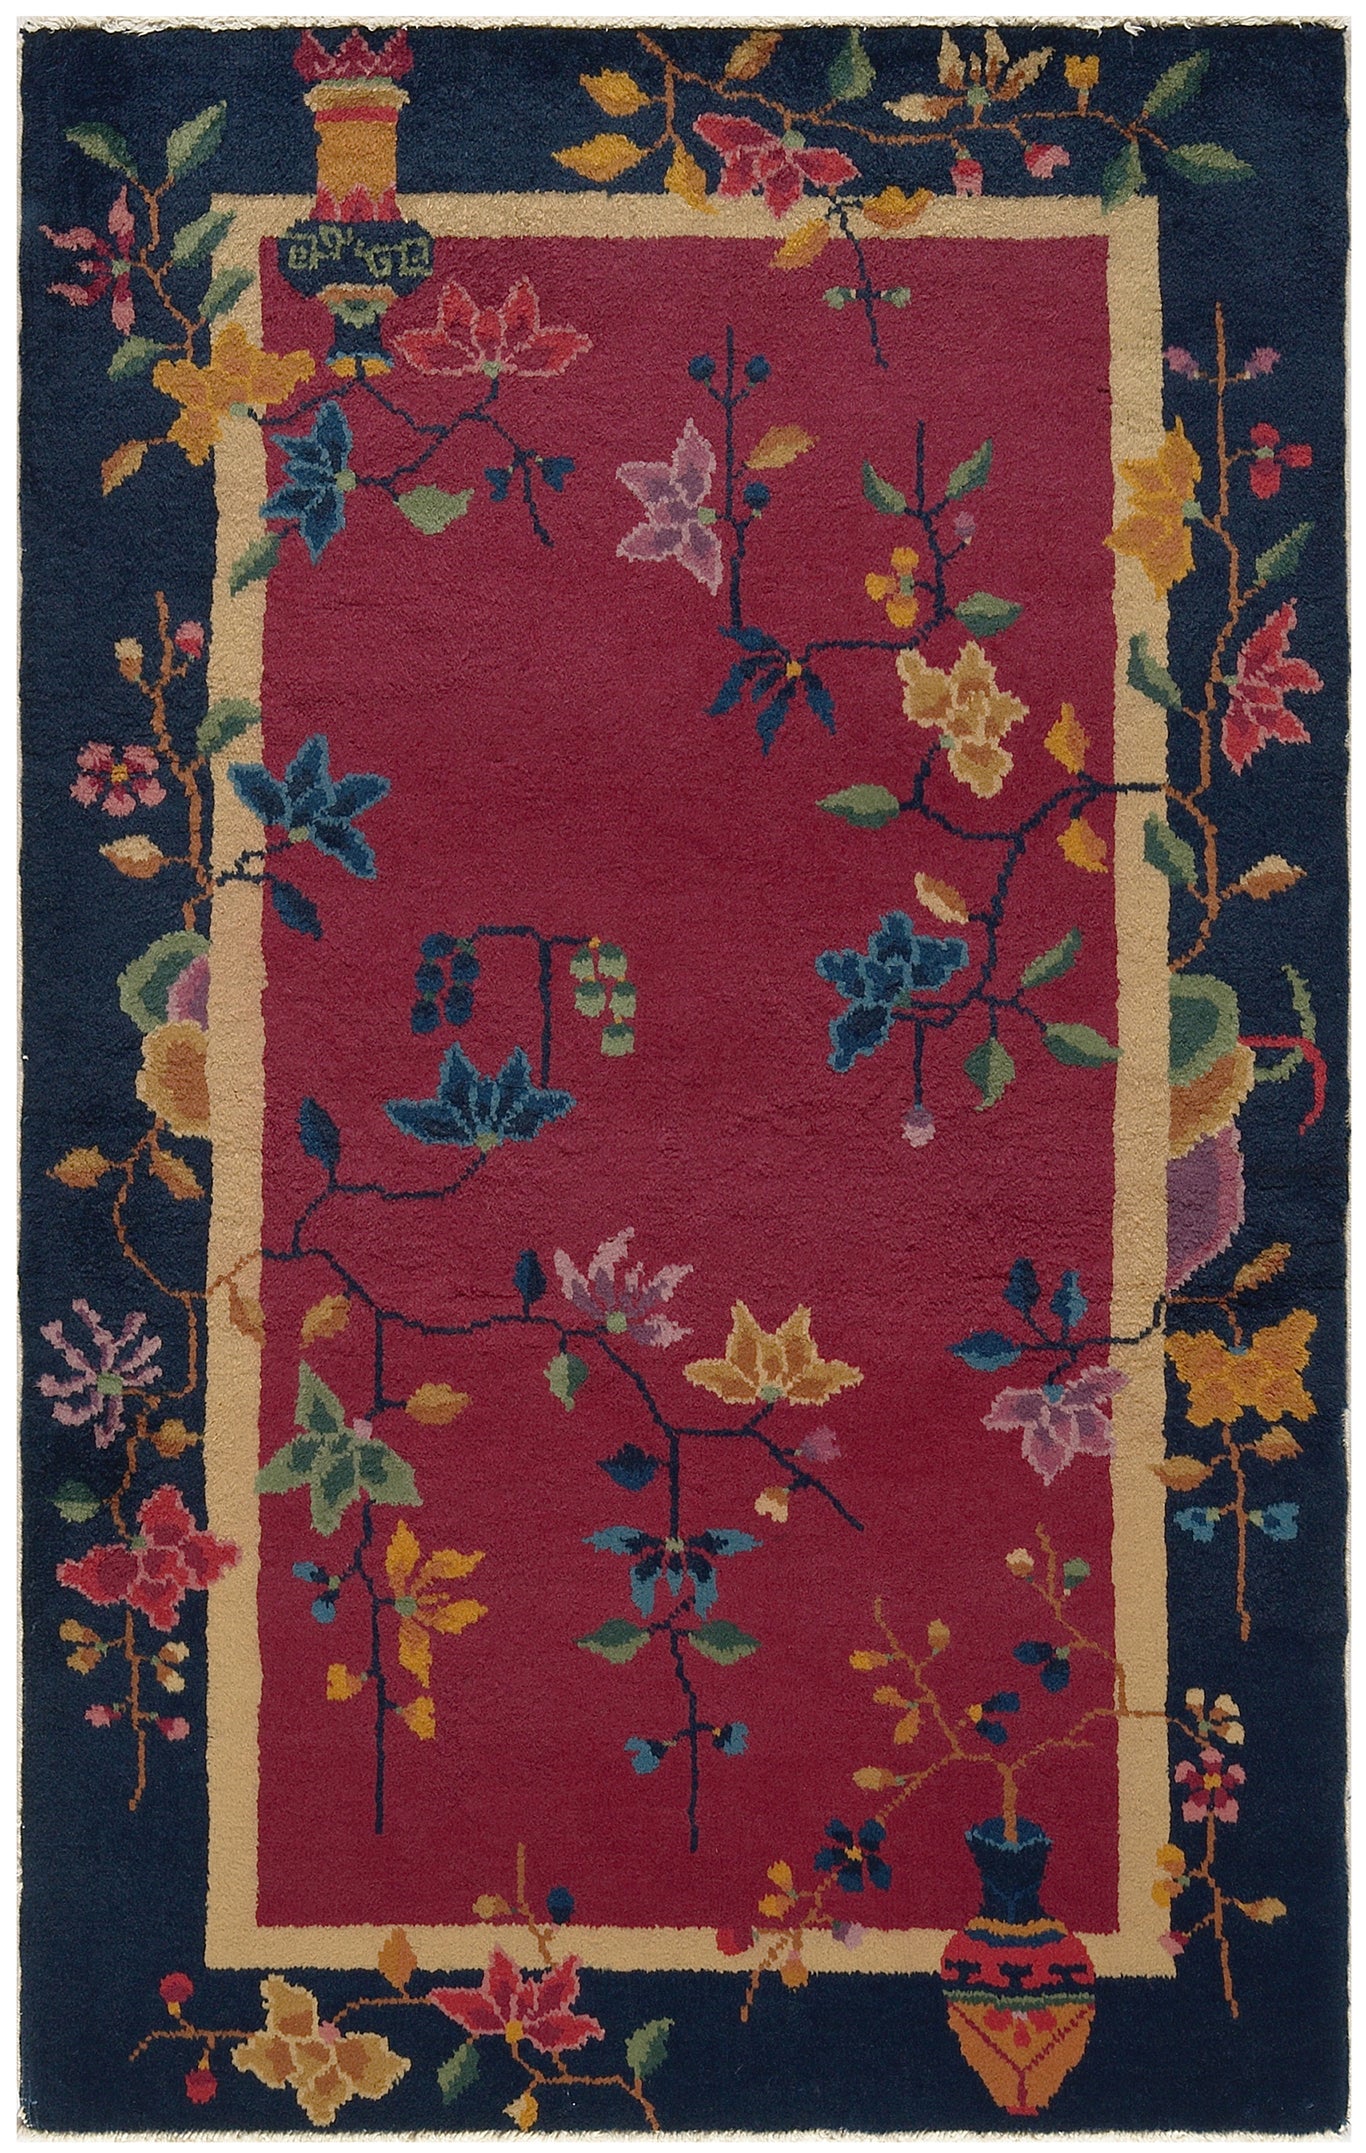 3'x5' Red and Navy Blue Floral Chinese Art Deco Rug